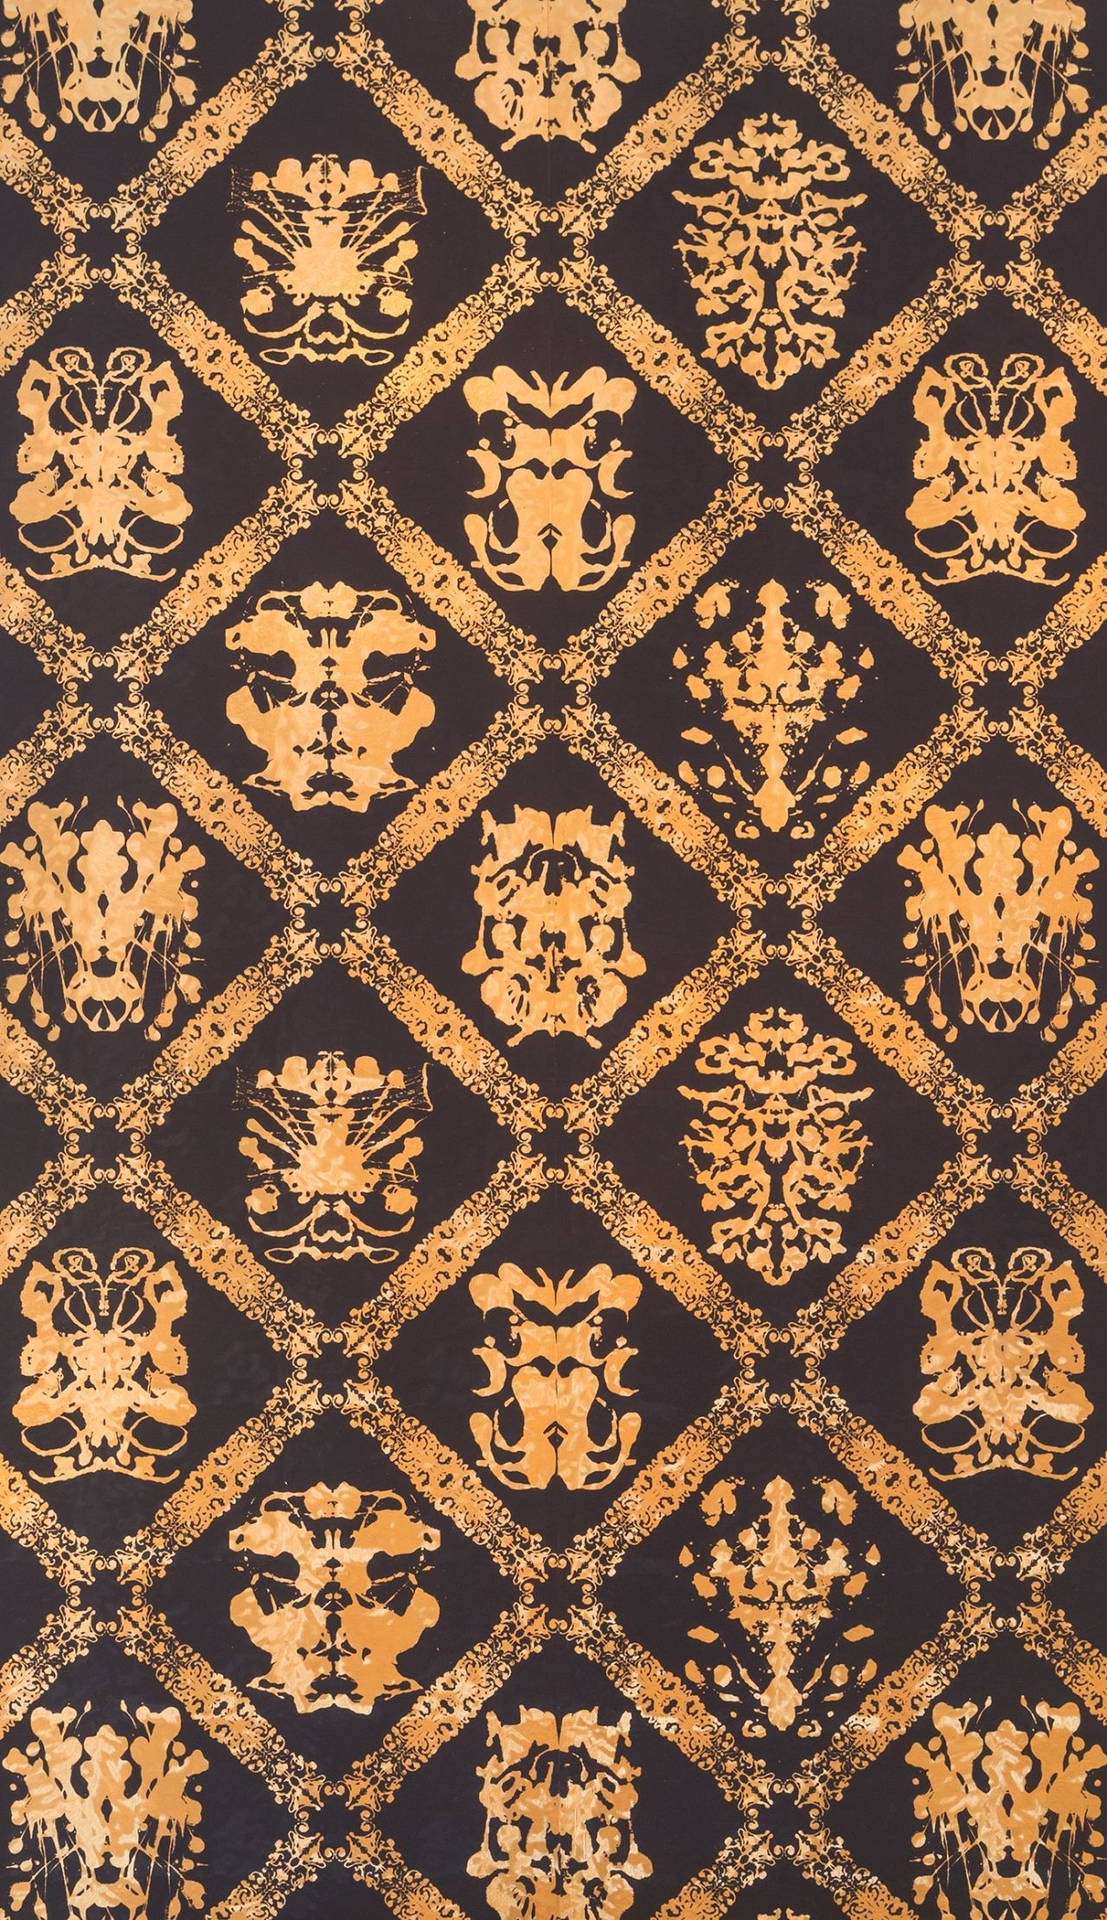 Gold Foil With Rorschach Pattern Background